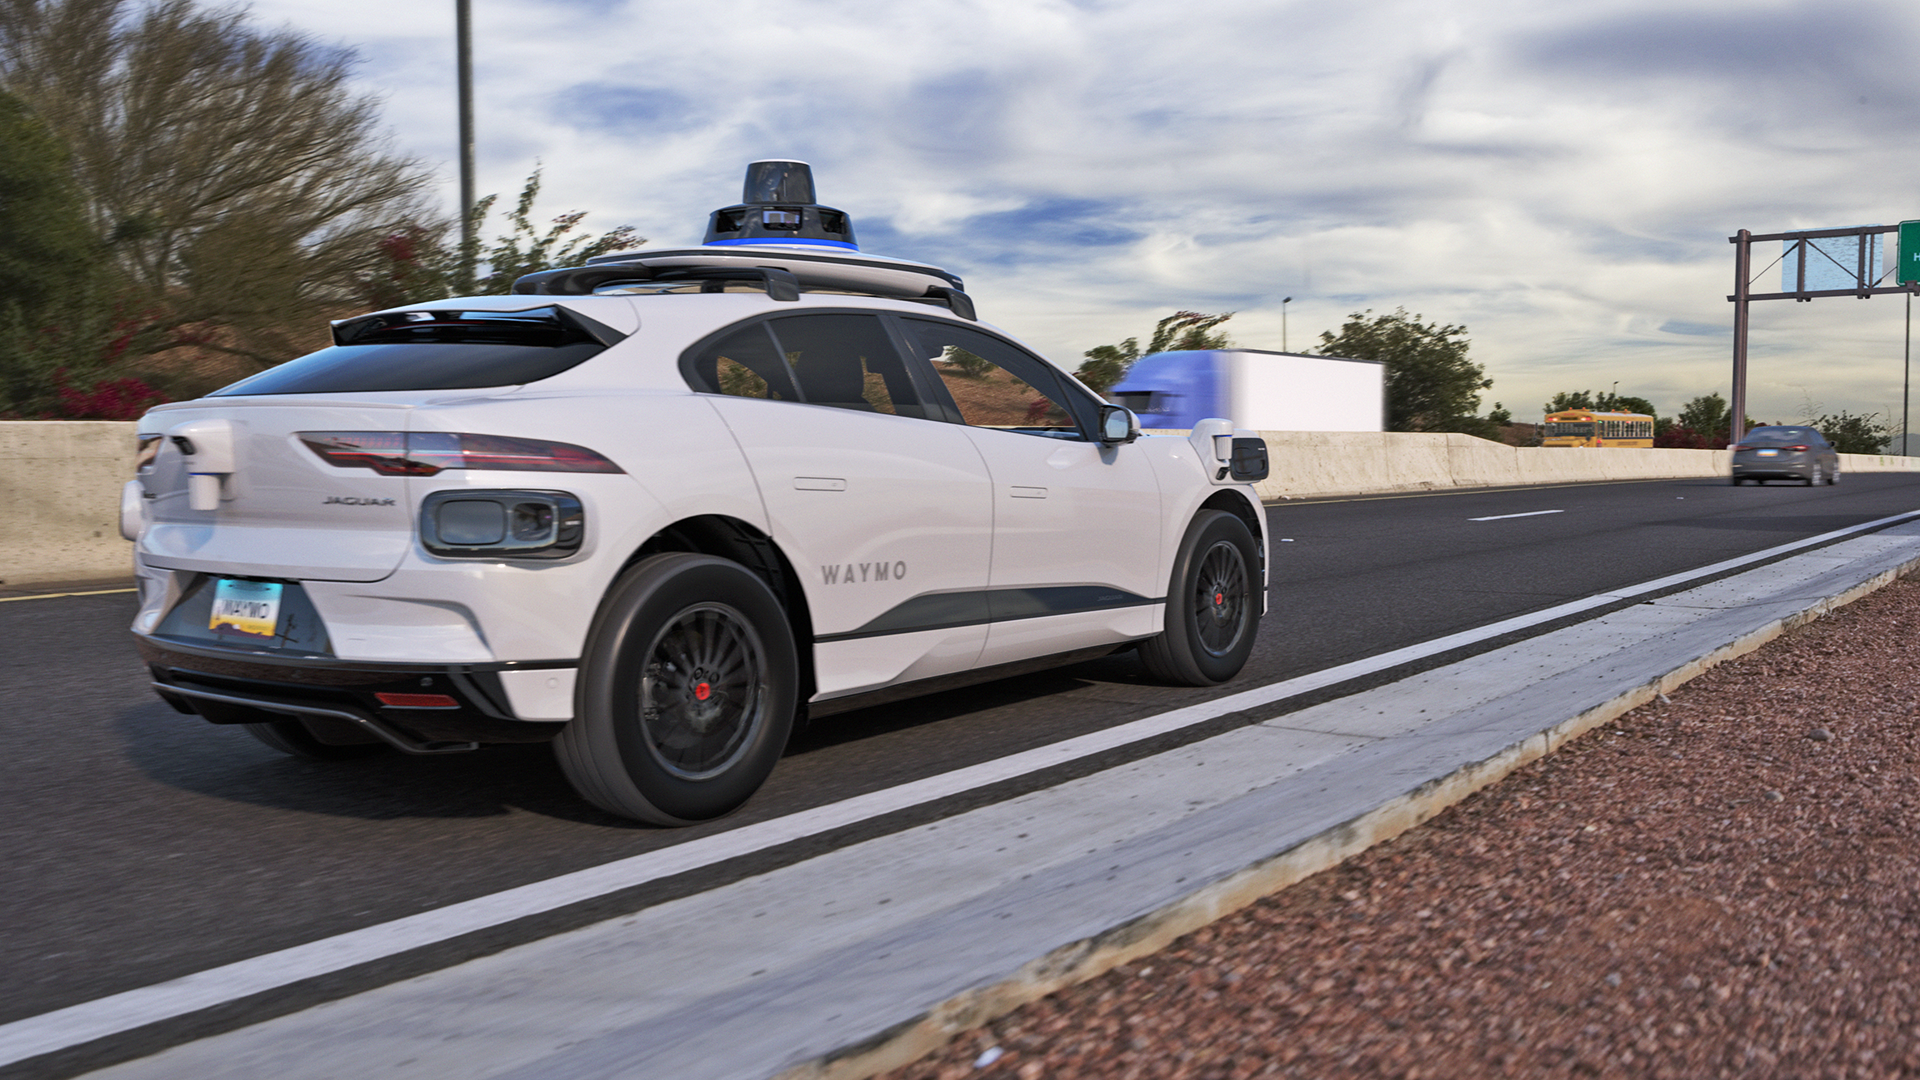 Waymo will begin testing its fully autonomous passenger cars without a human driver on freeways in Phoenix